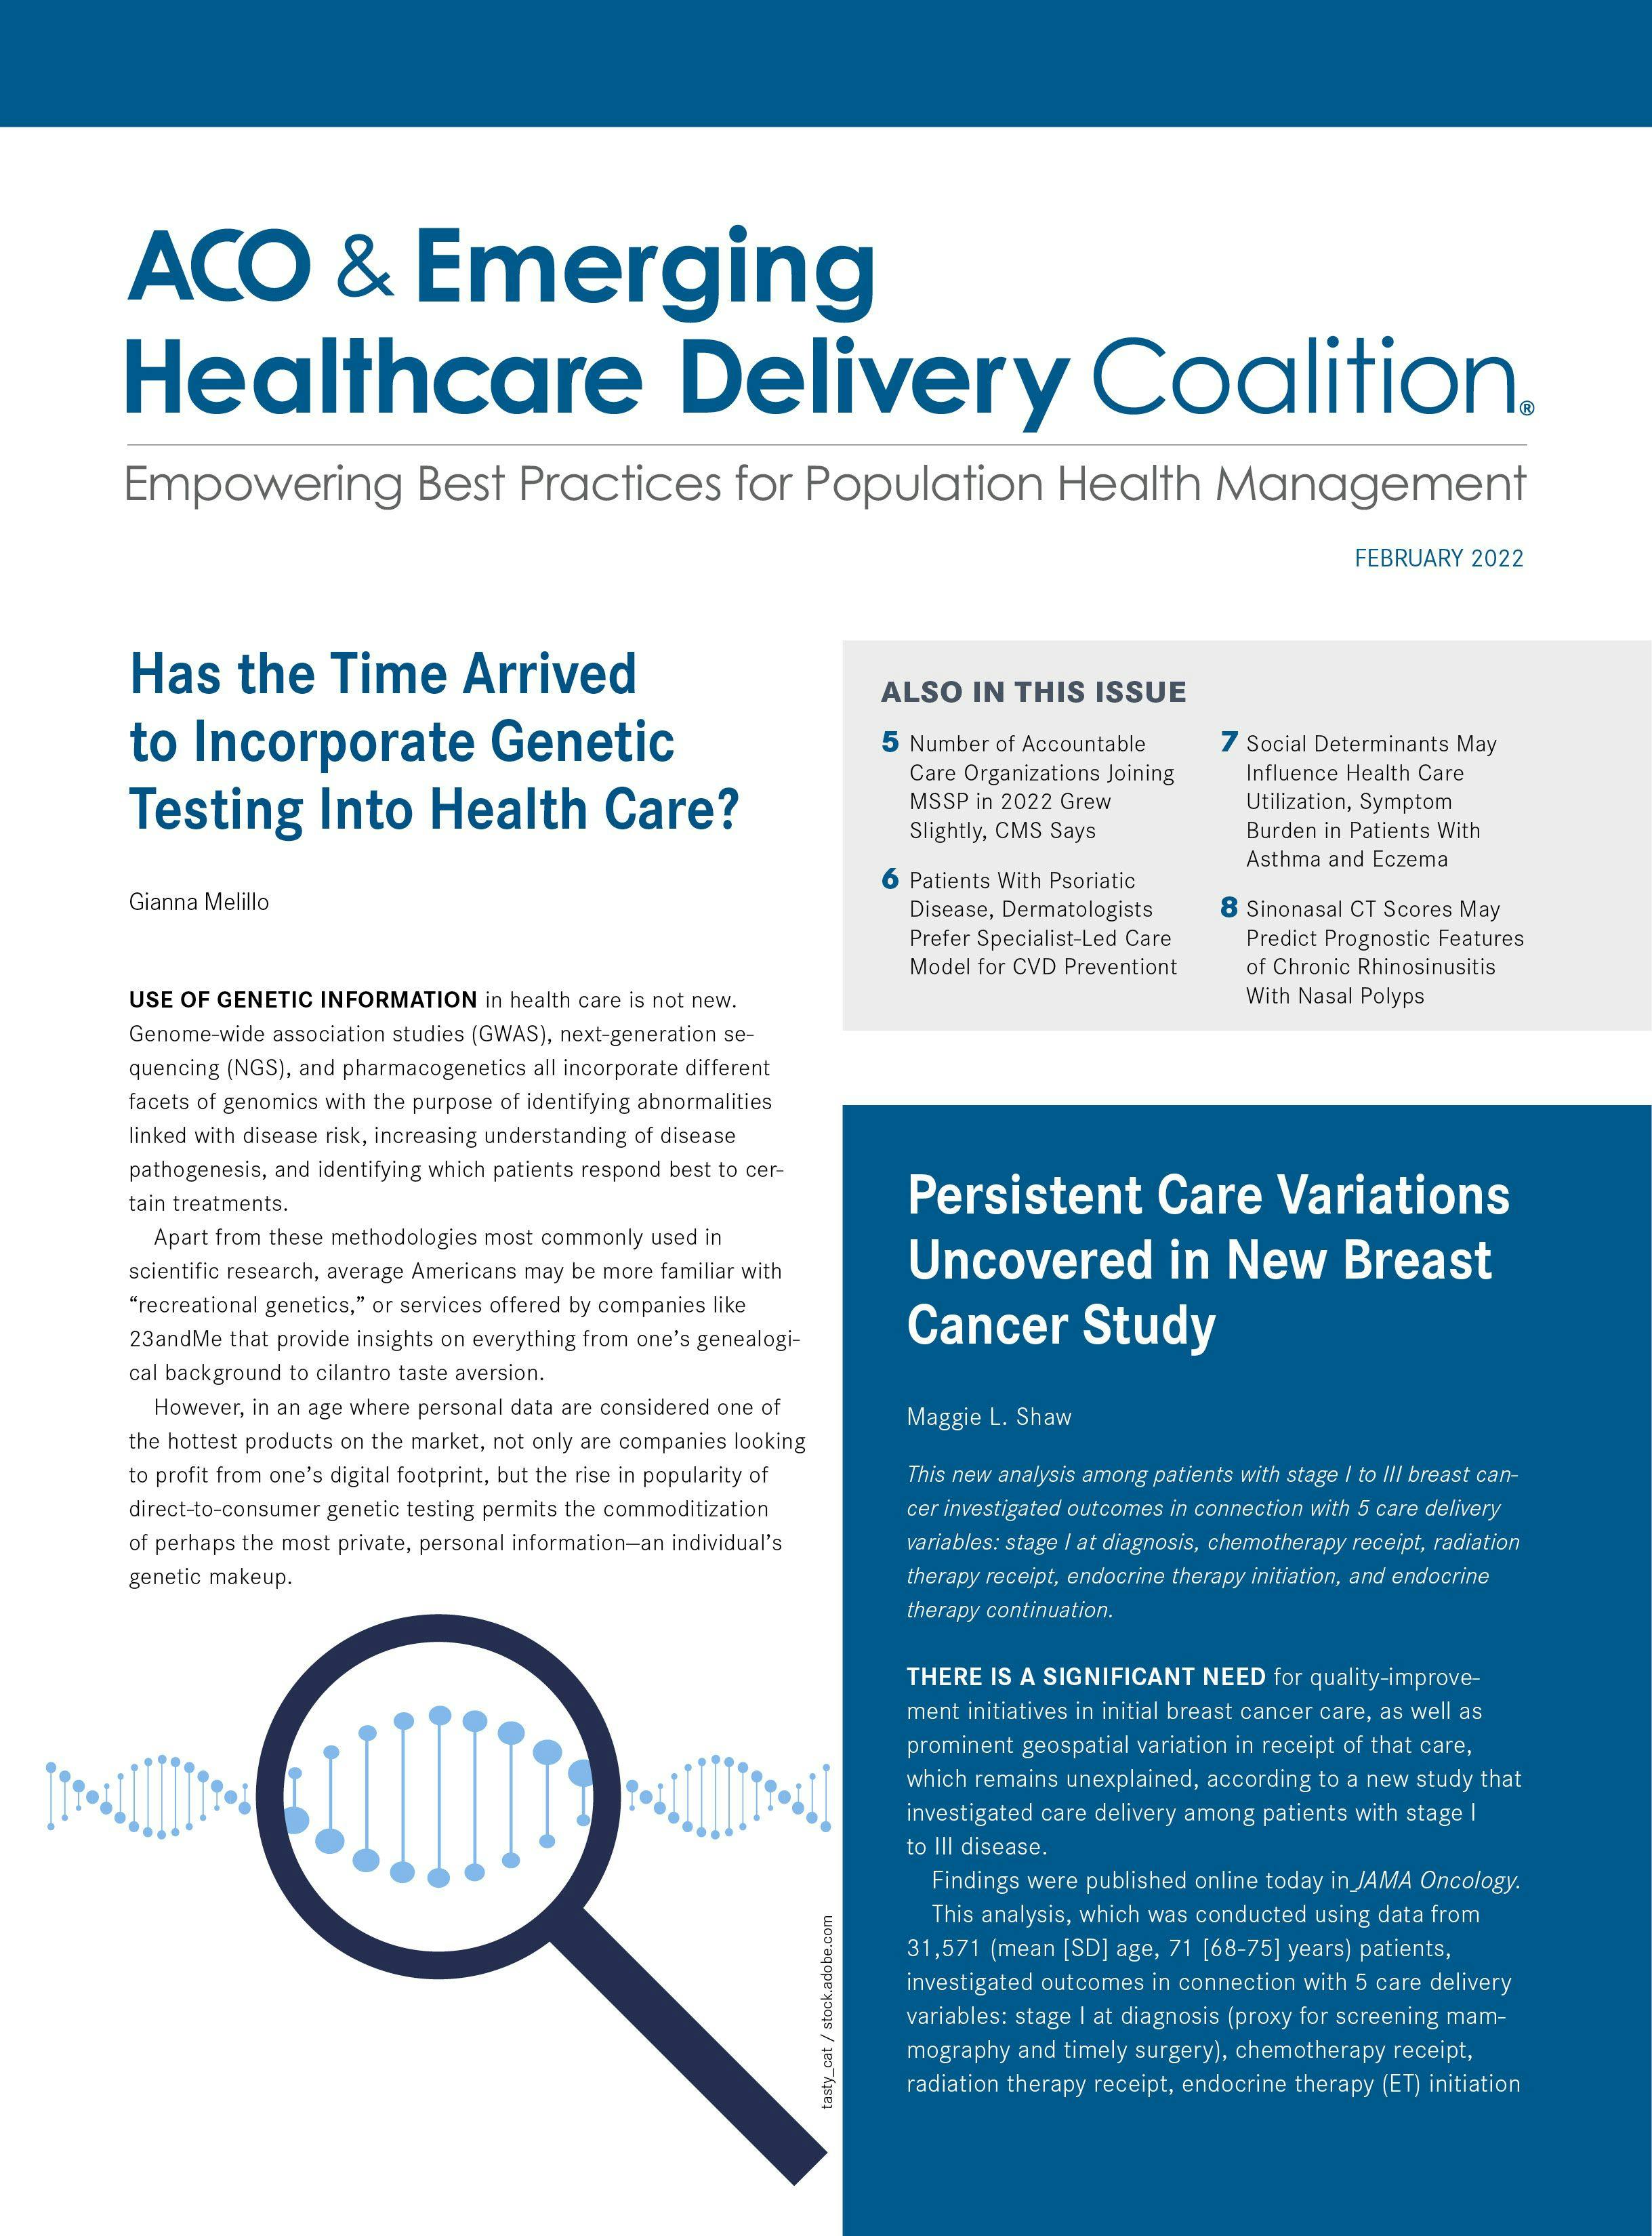 ACO & Emerging Healthcare Delivery Coalition®: February 2022